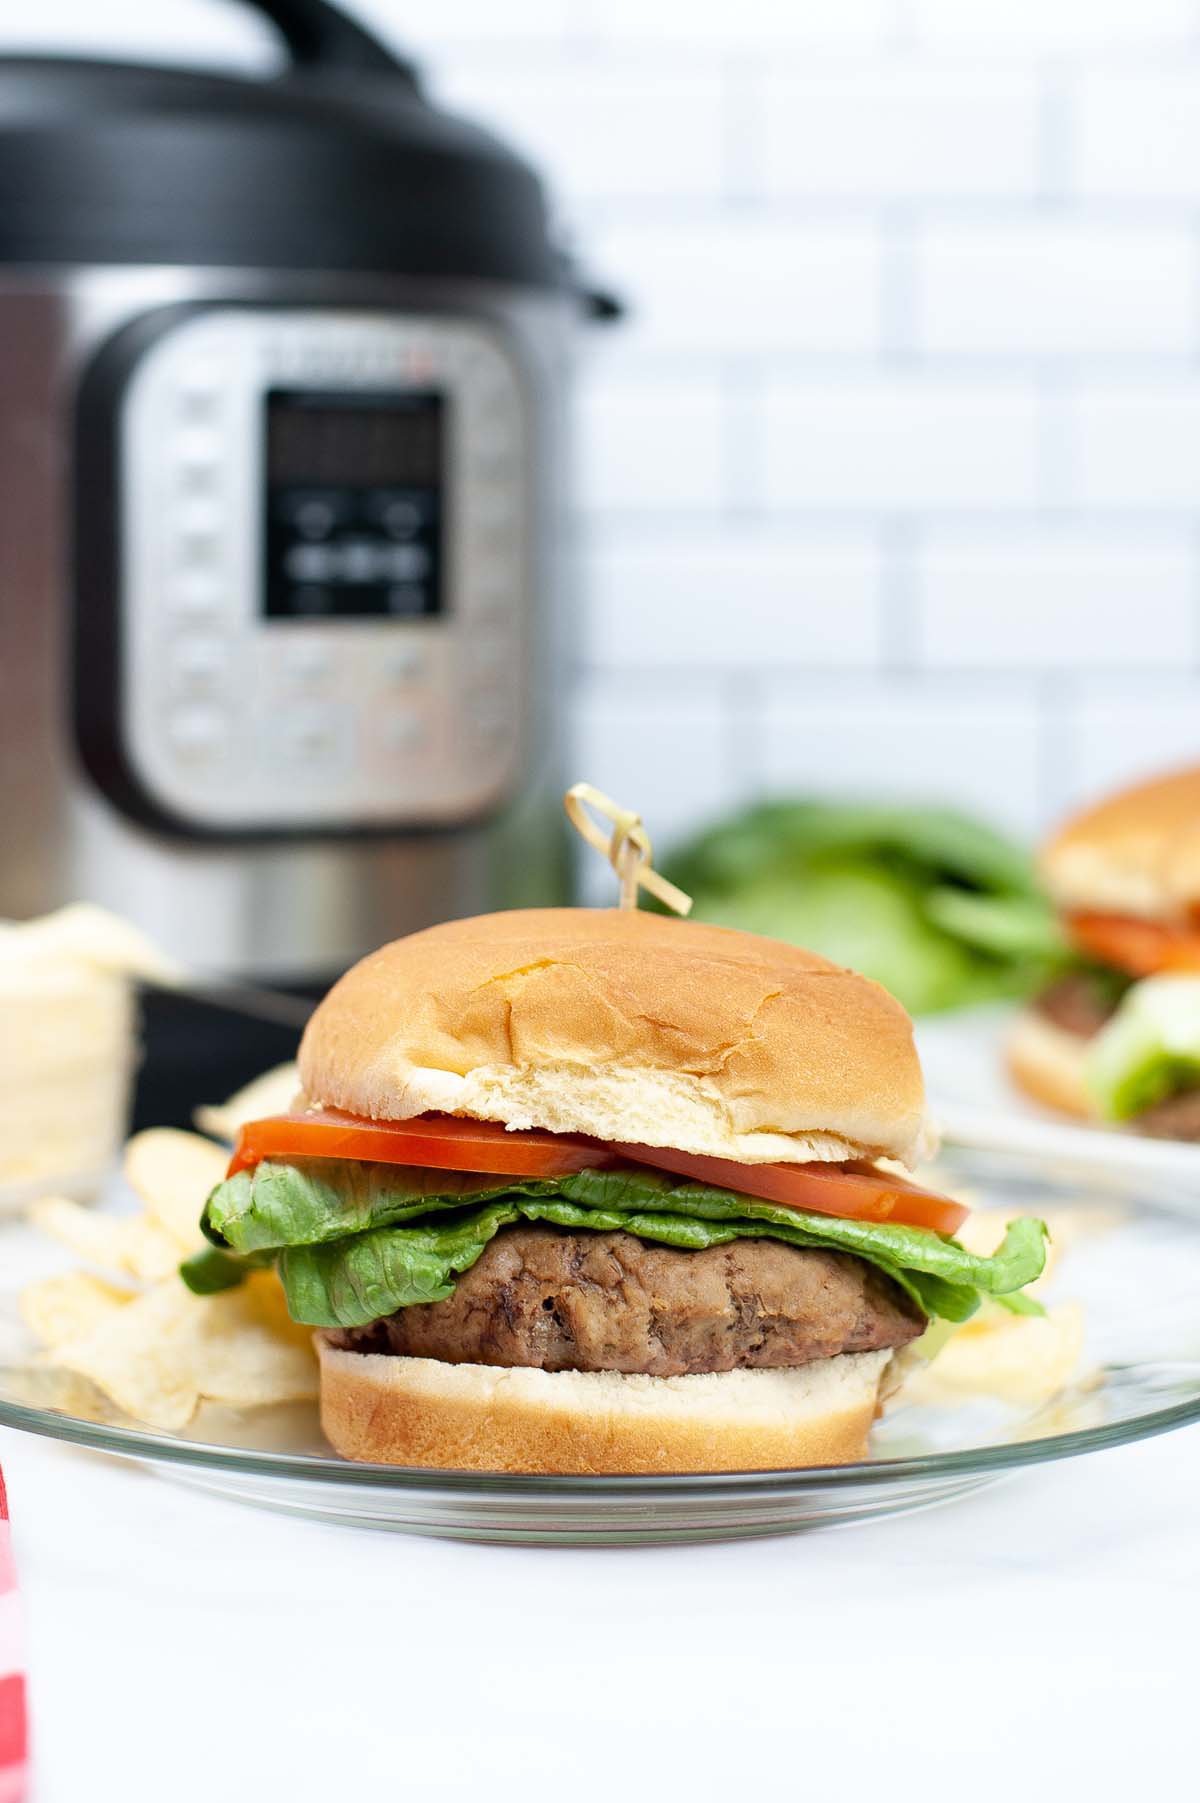 Burger on a plate in front of the Instant Pot.